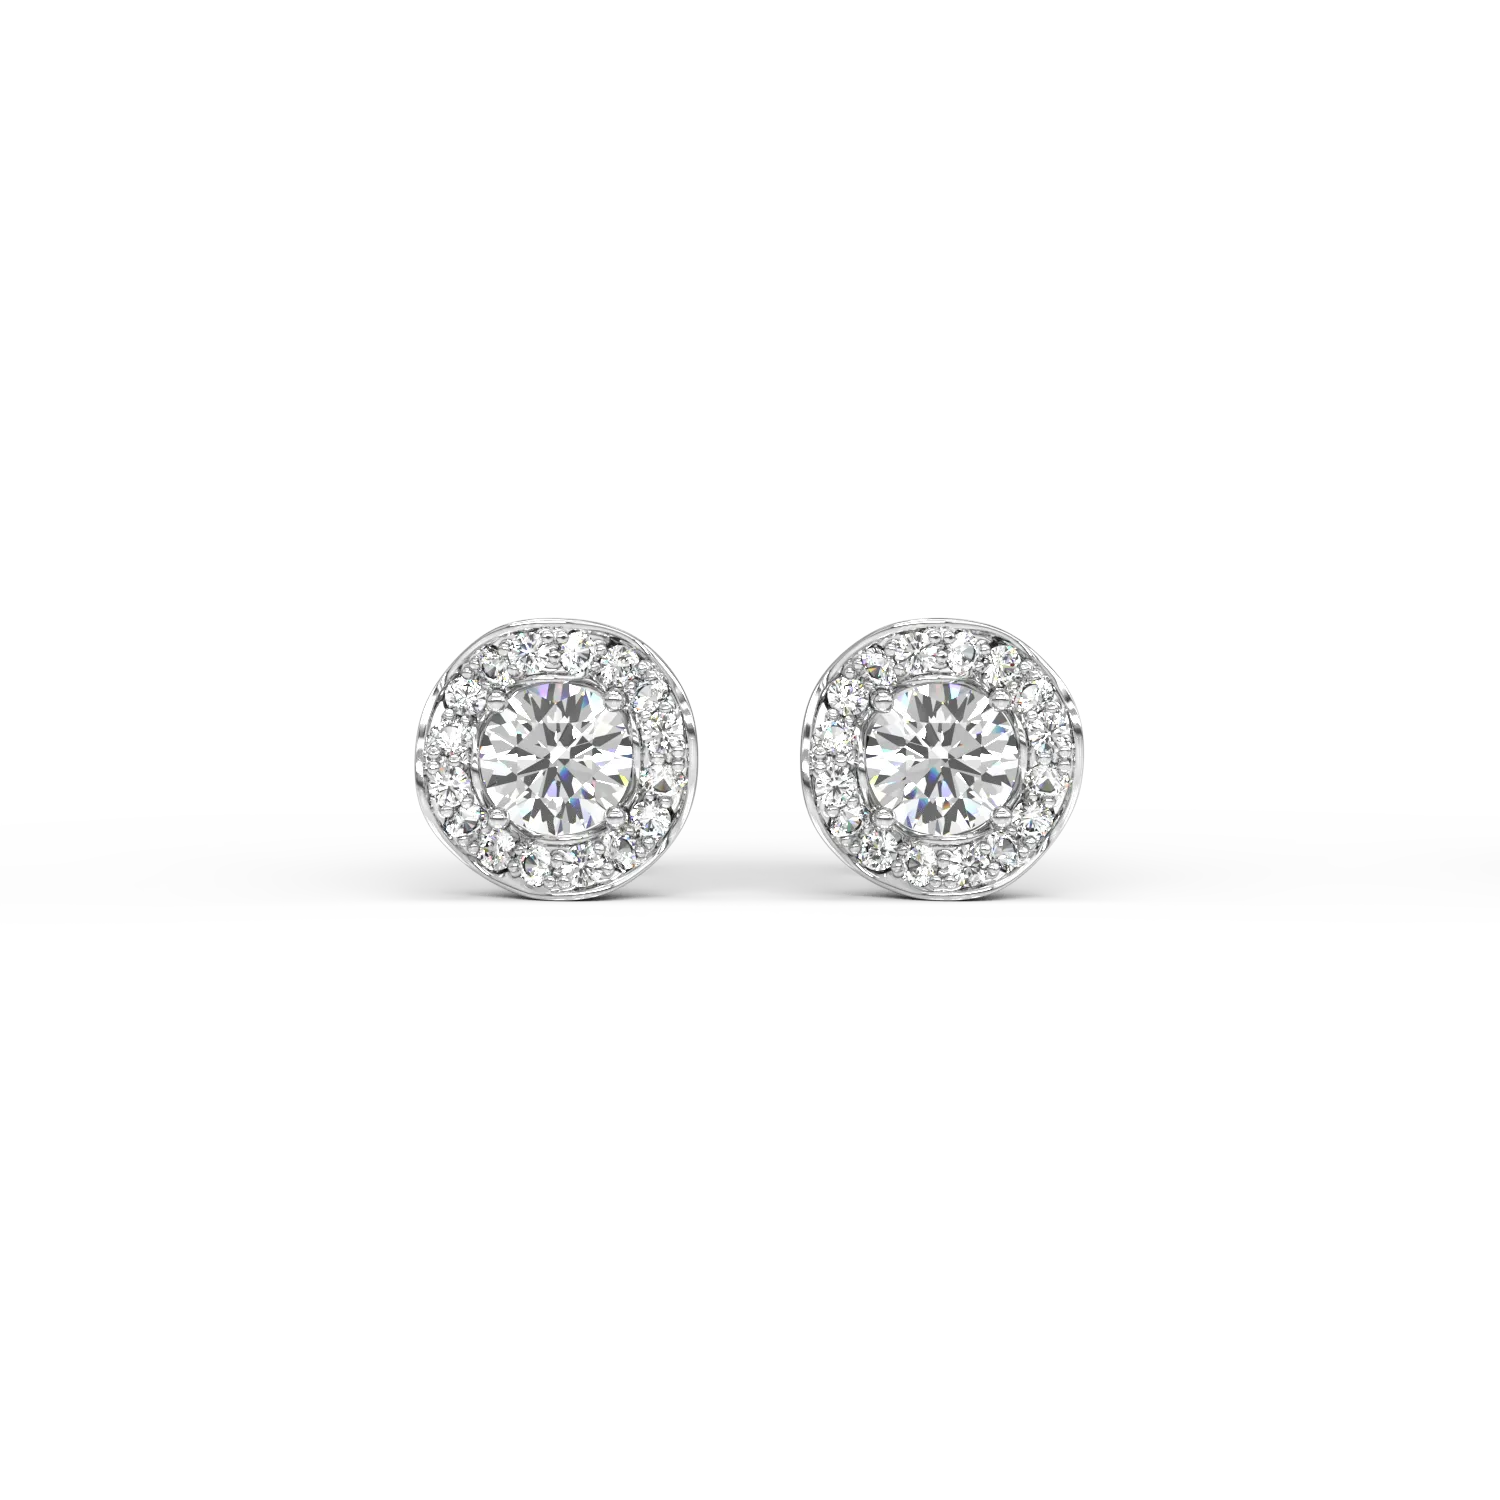 14K white gold earrings with 0.5ct diamonds